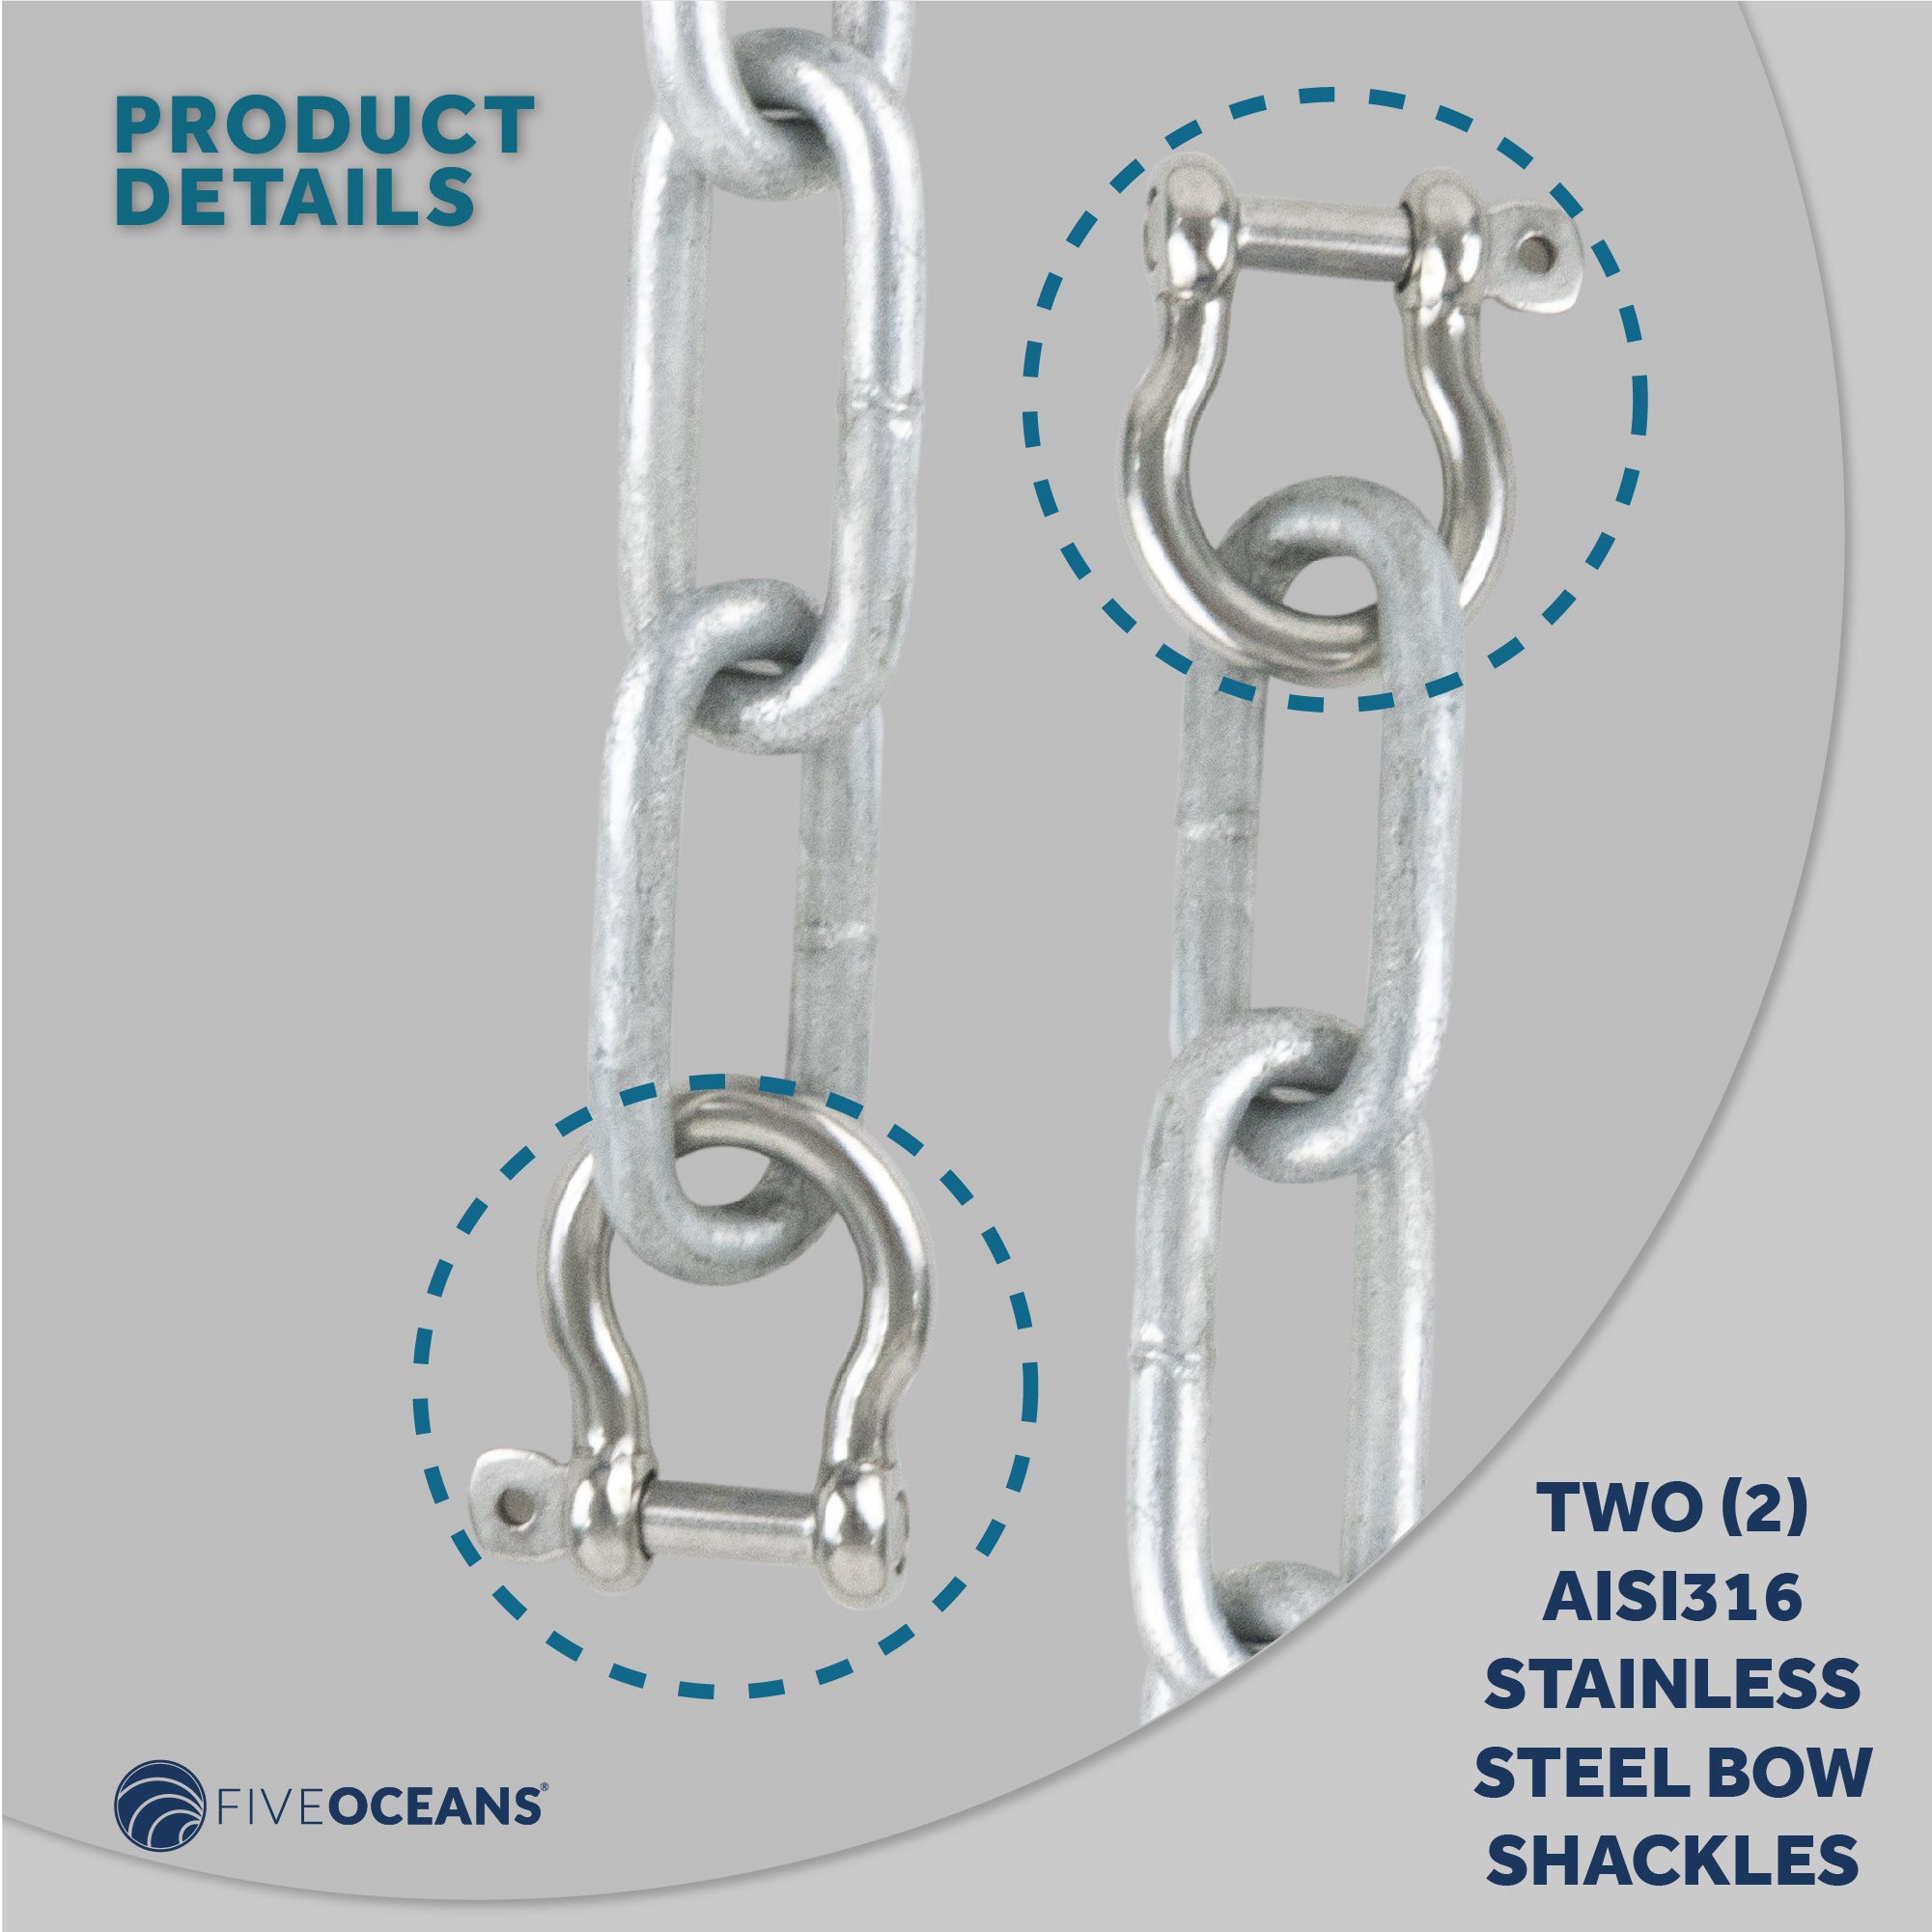 Boat Anchor Lead Chain with Shackles, 1/4 inches x 2 Feet Hot-Dipped Galvanized Steel with 2 AISI316 Stainless Steel 1/4 inches Bow Shackles FO4568-GN2